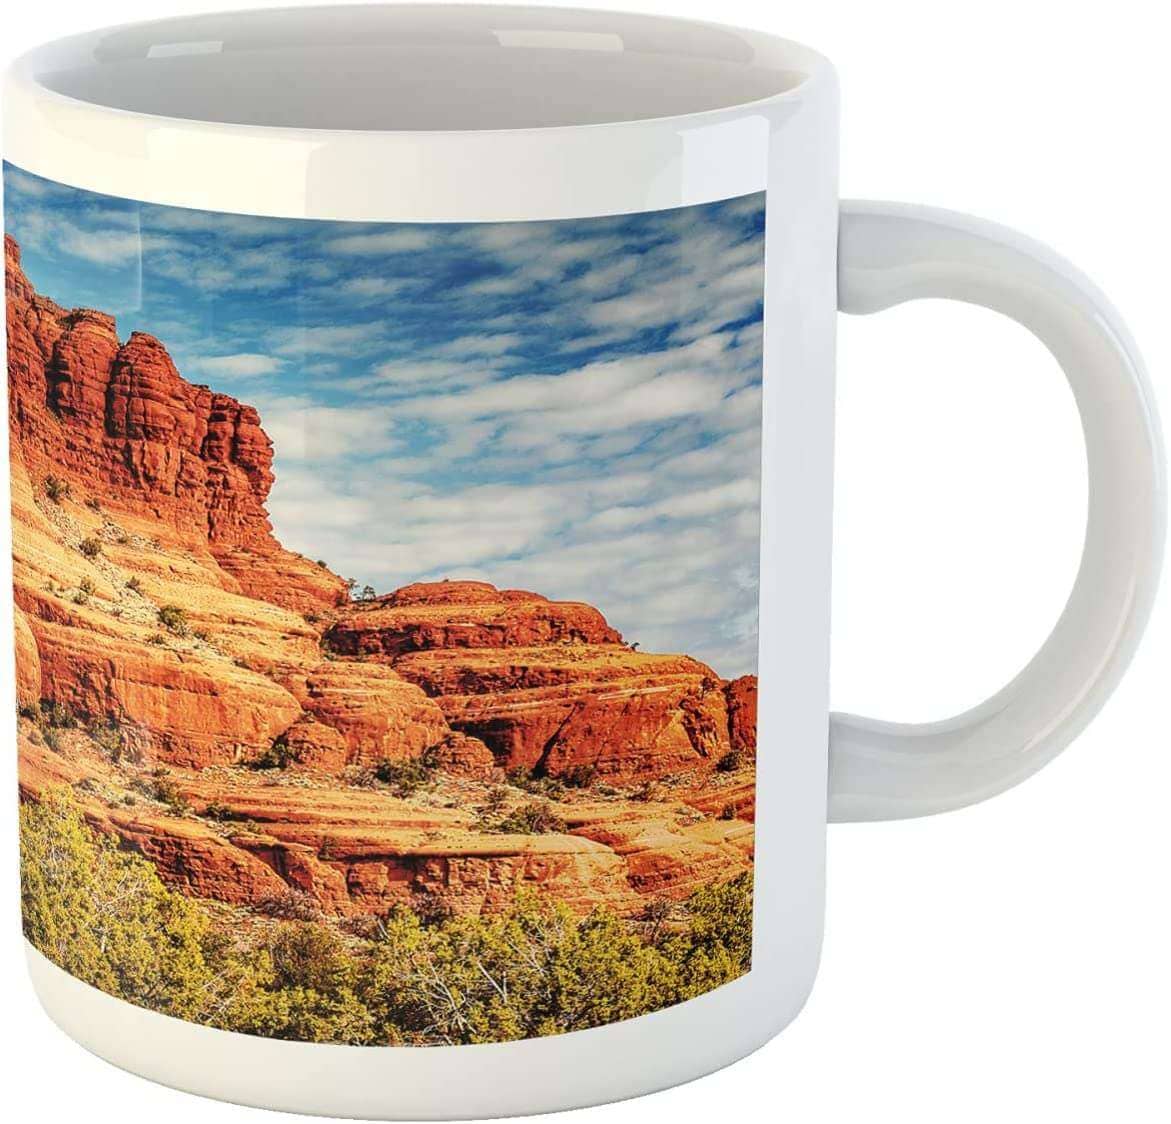 The 11 Most Unique Coffee Mugs 2022